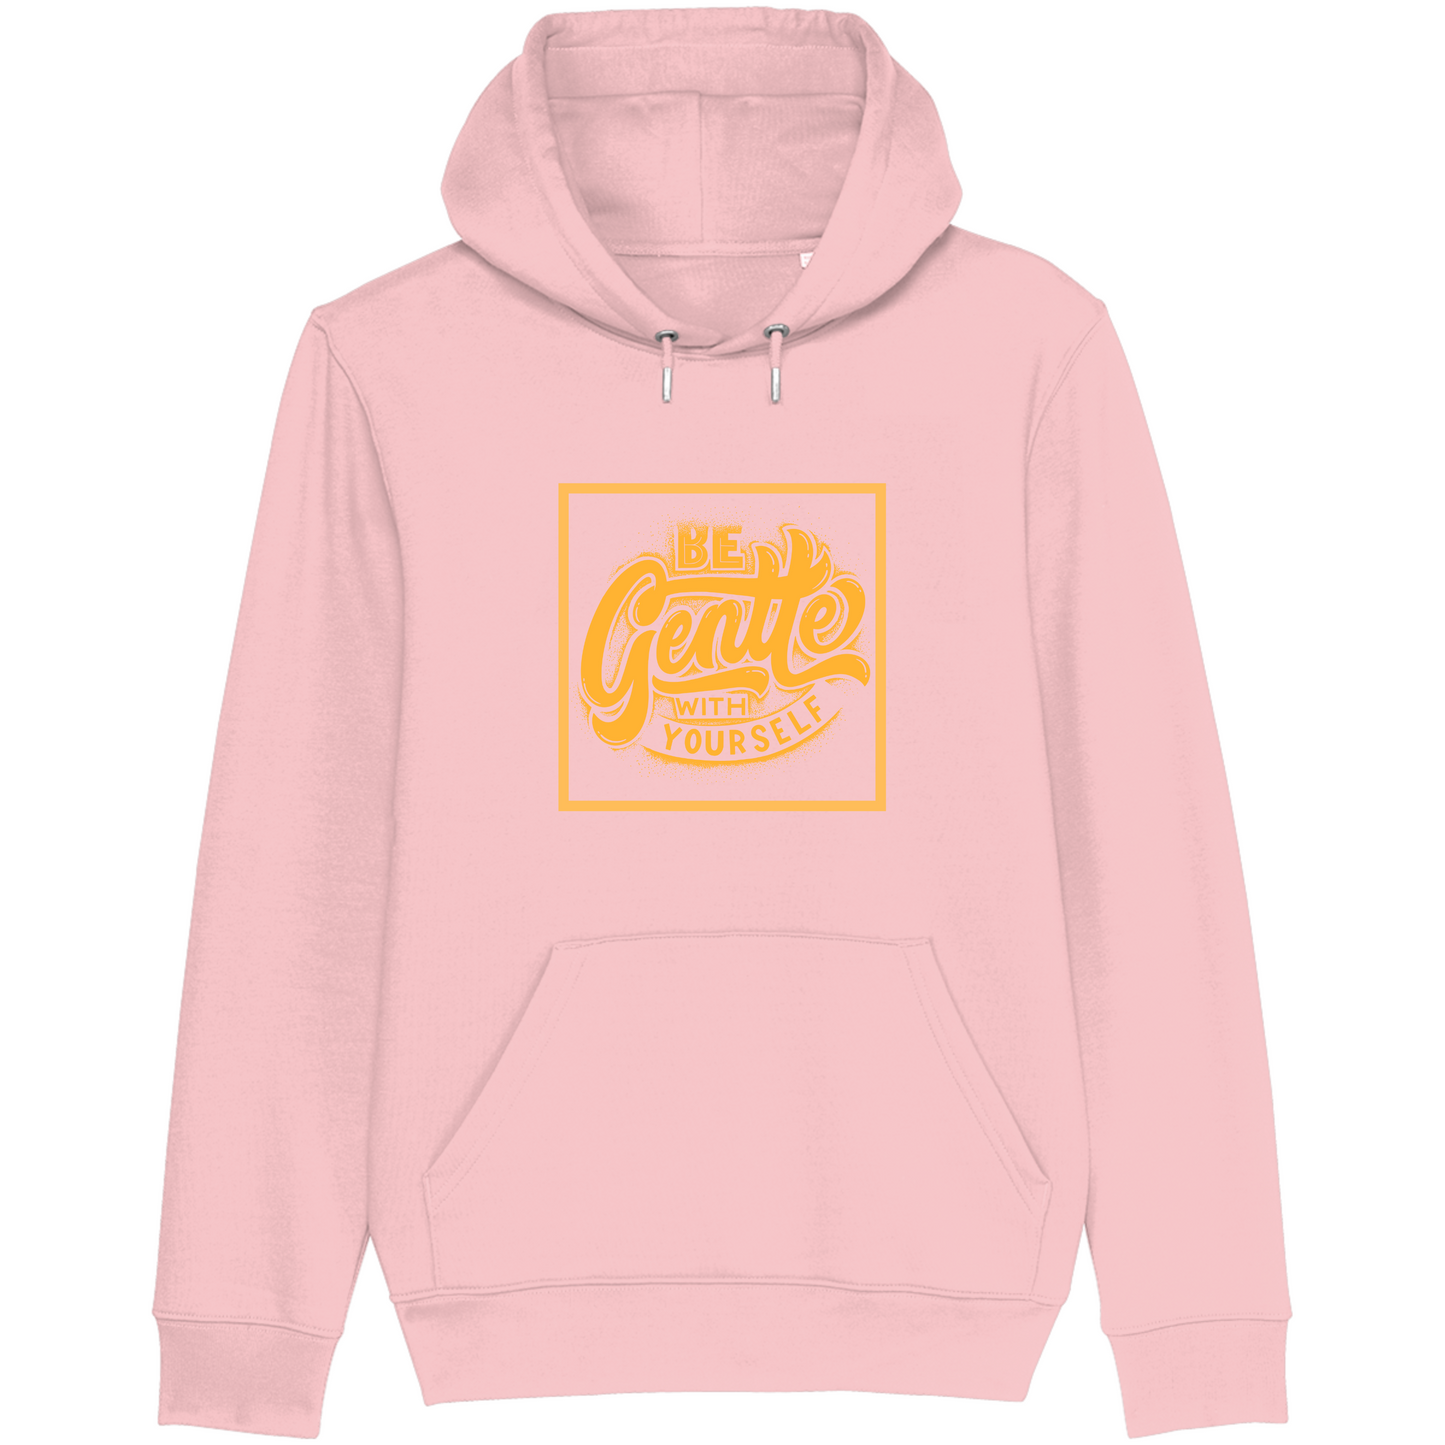 Be Gentle With Yourself - Hoodie